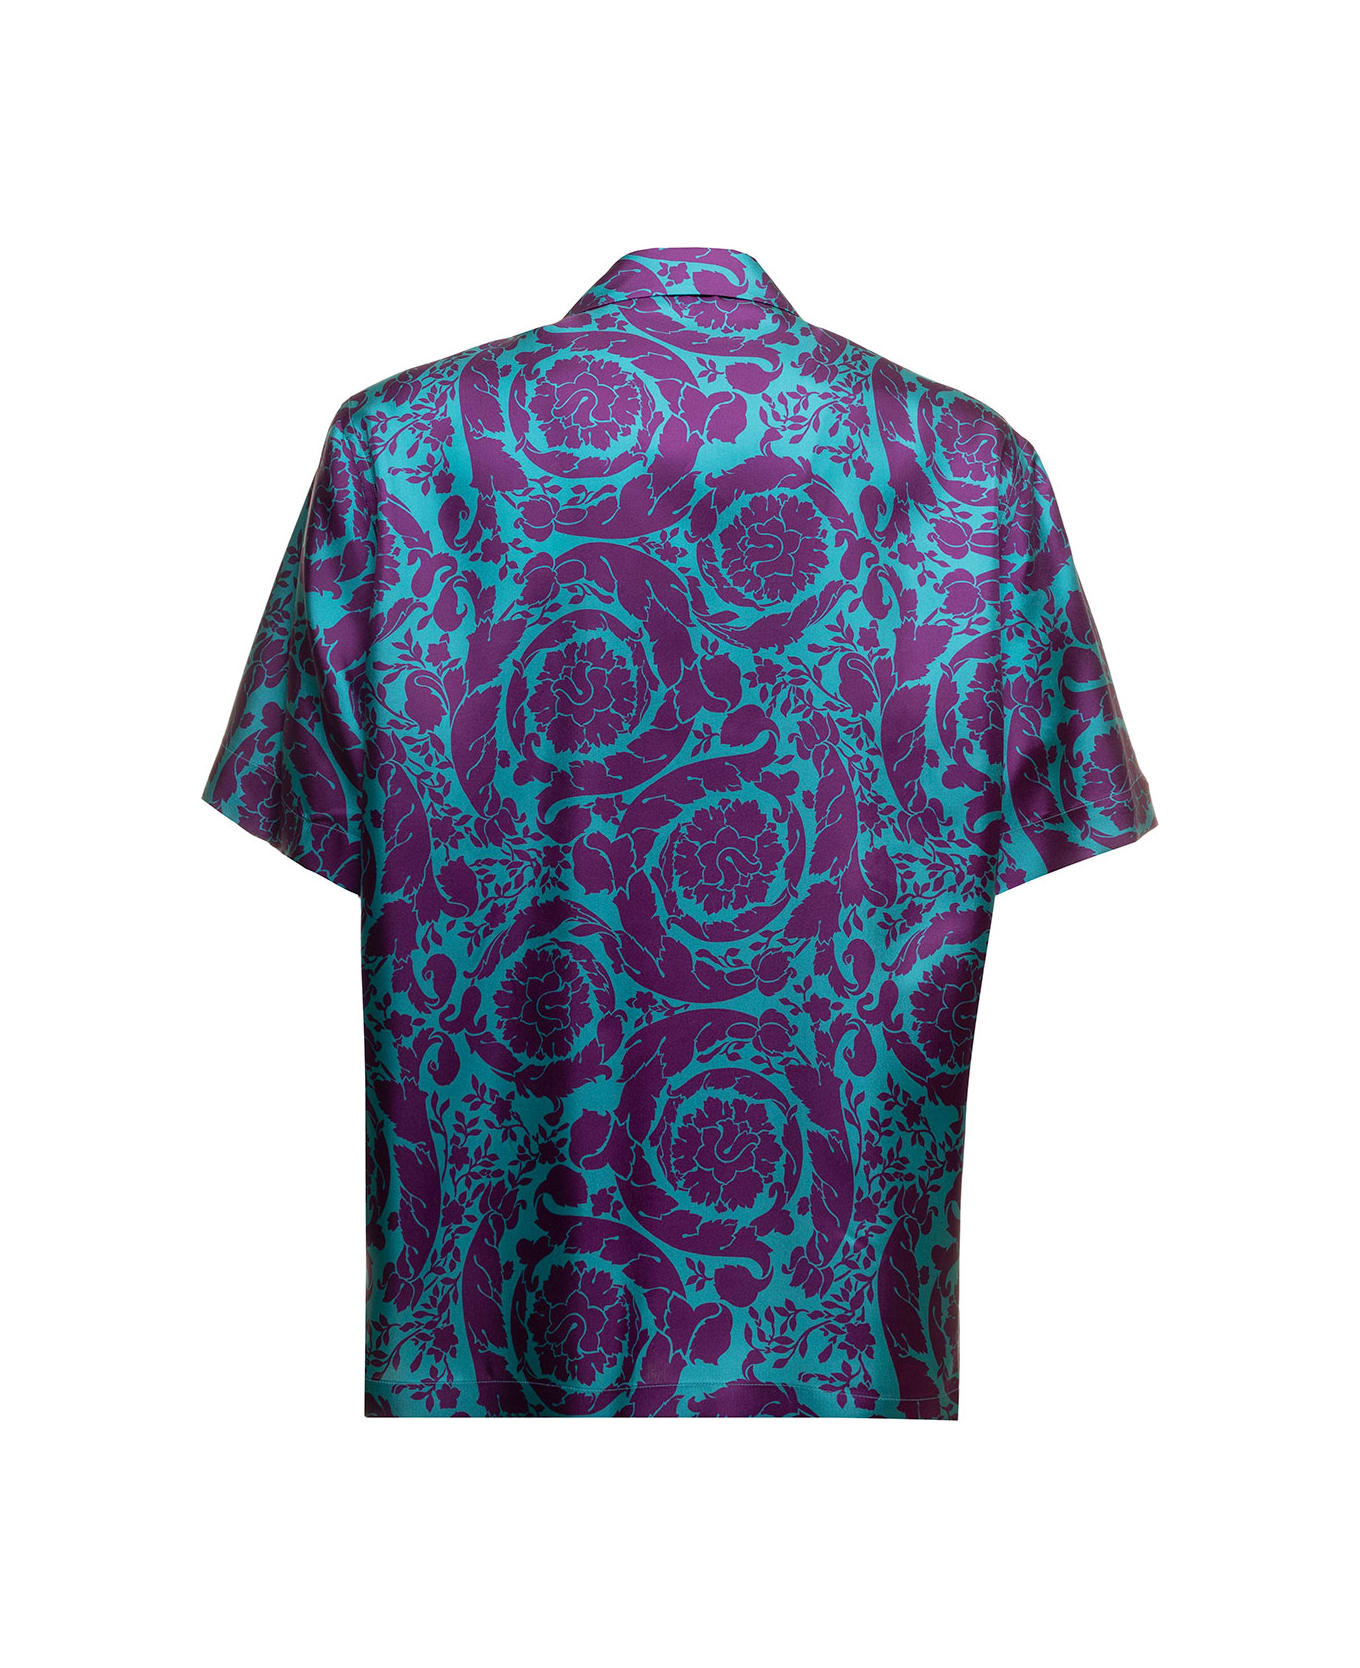 Versace Barocco Purple And Light Blue Bowling Shirt In Silk Twill With Allover Printed Pattern Versace Man - Violet